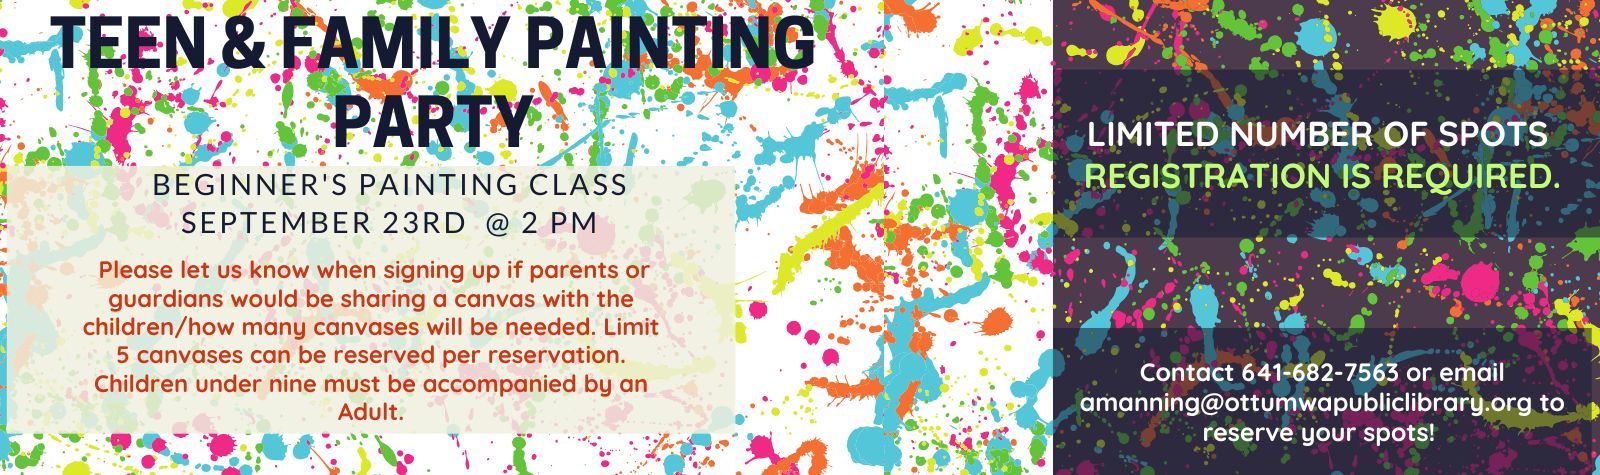 Teen & Family Painting Class